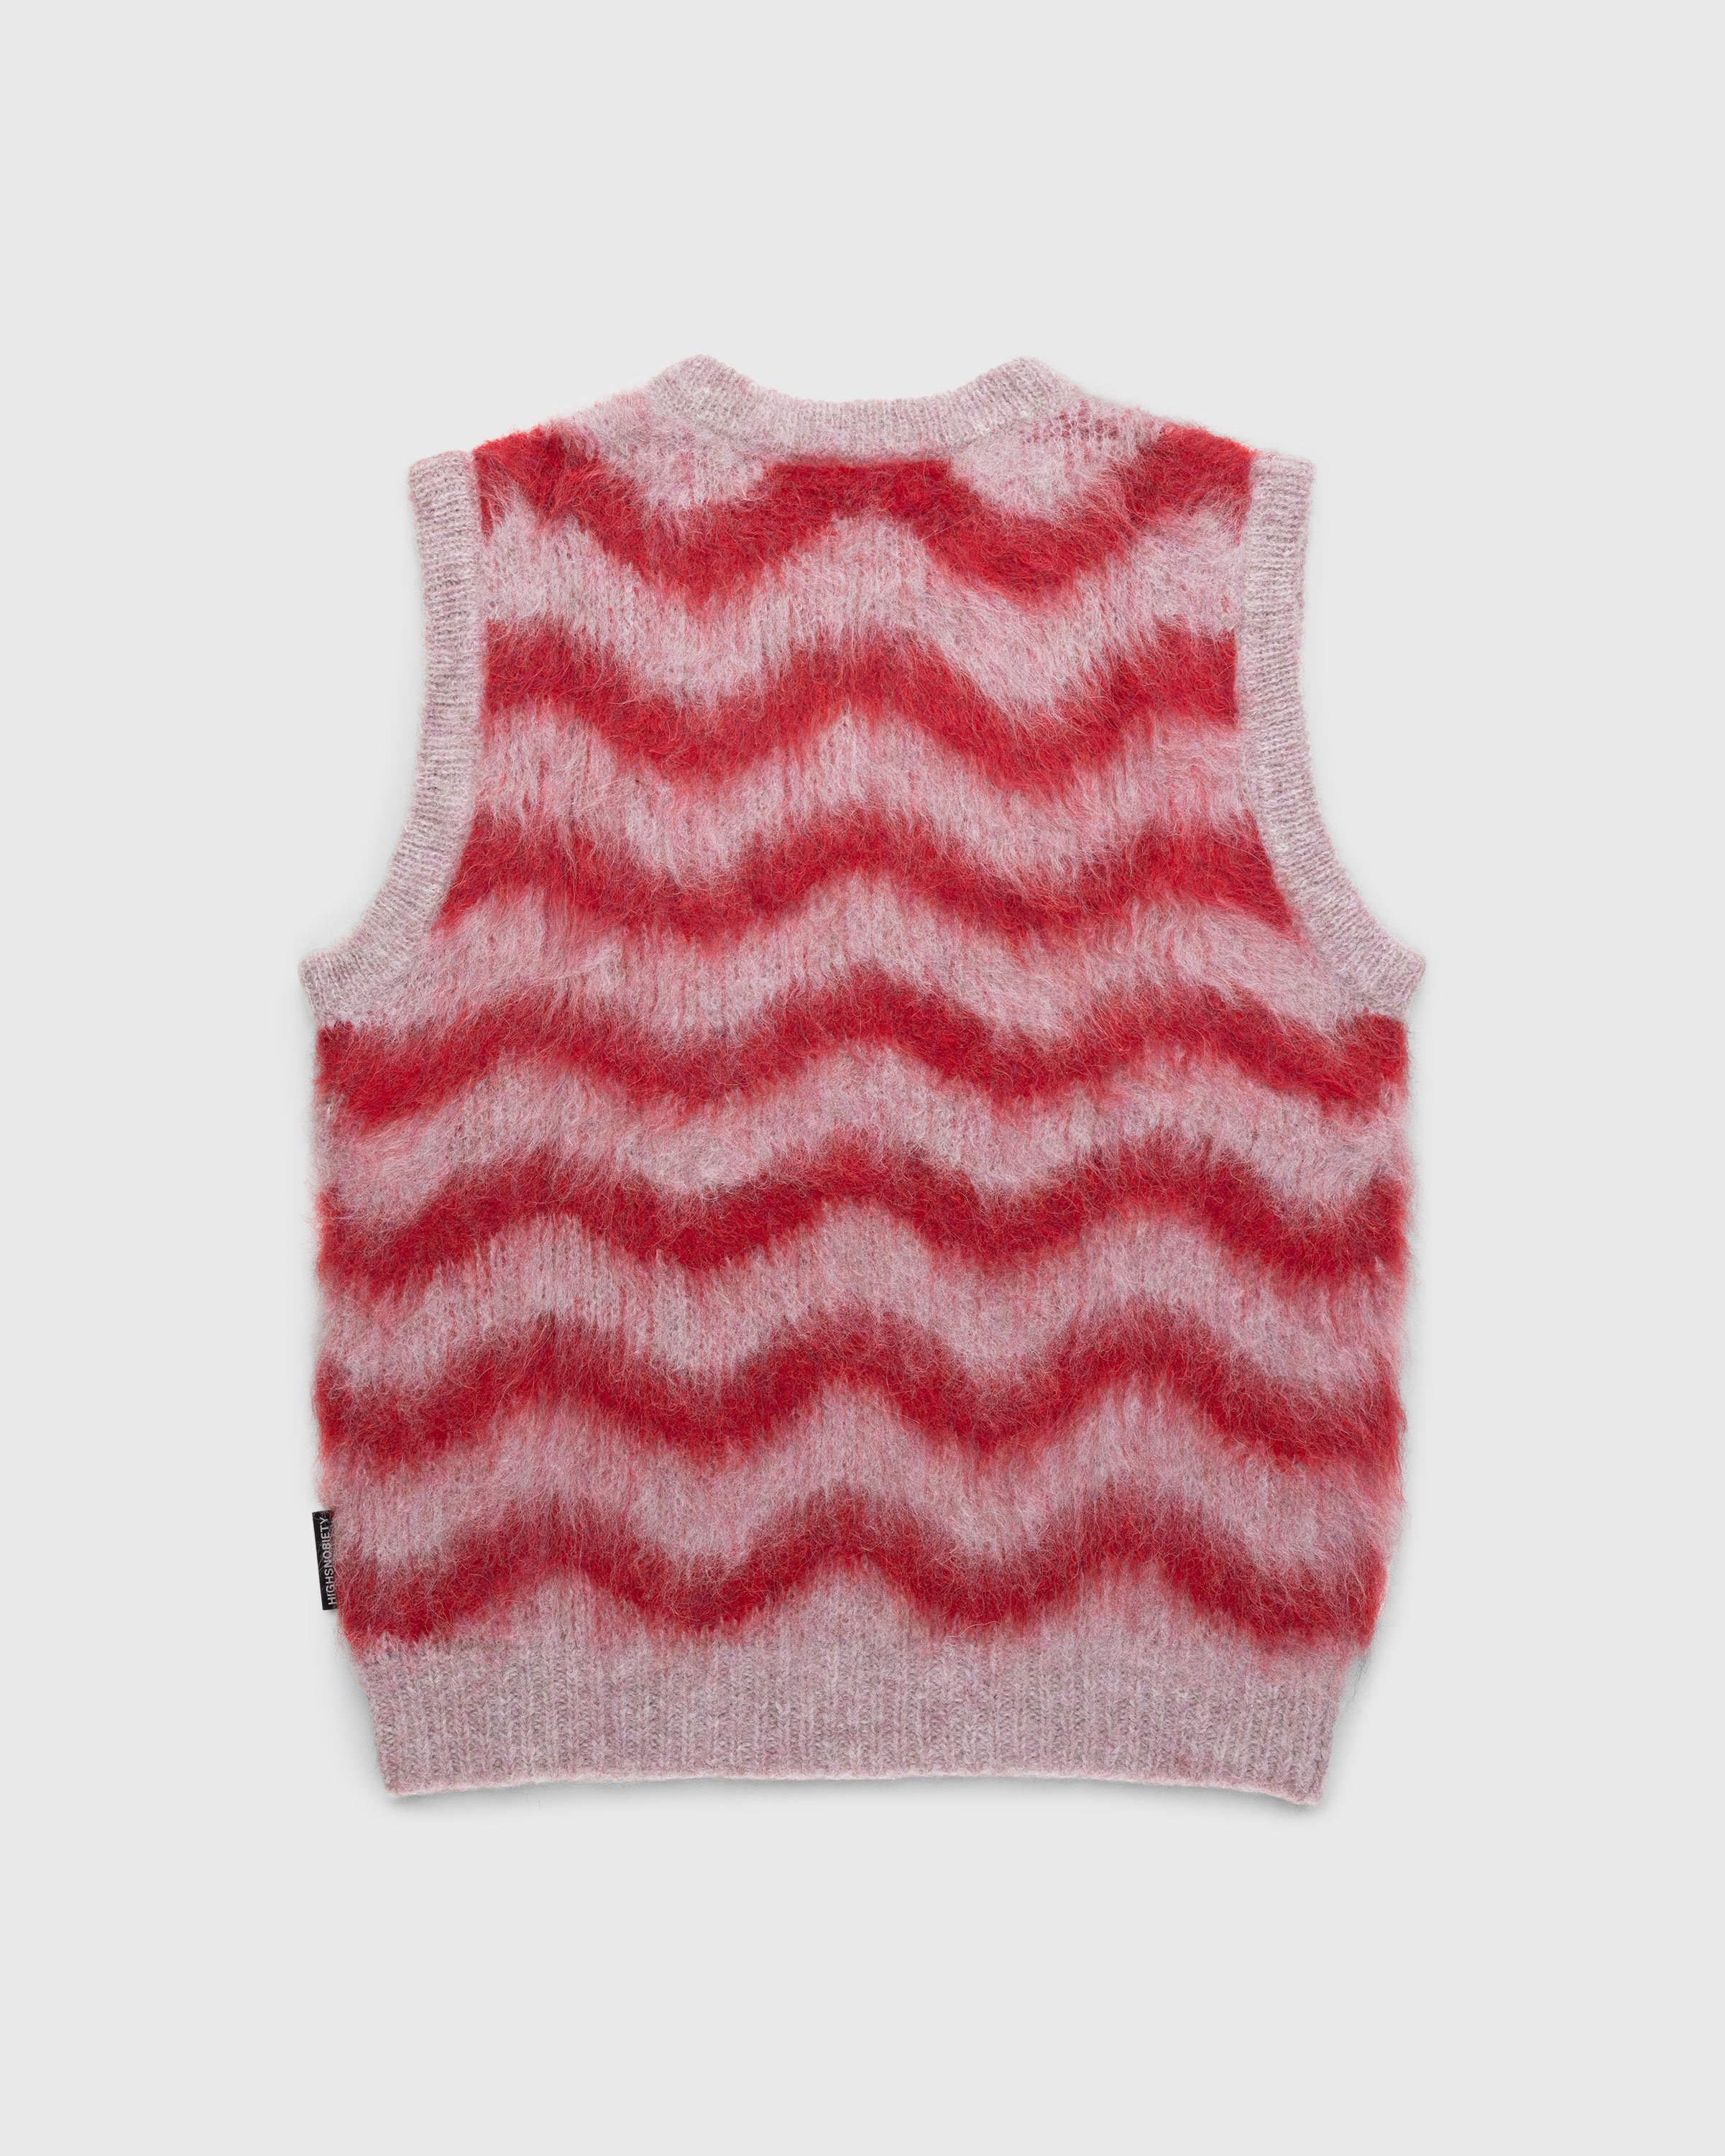 Highsnobiety HS05 - Alpaca Fuzzy Wave Sweater Vest Pale Rose/Red - Clothing - Multi - Image 2